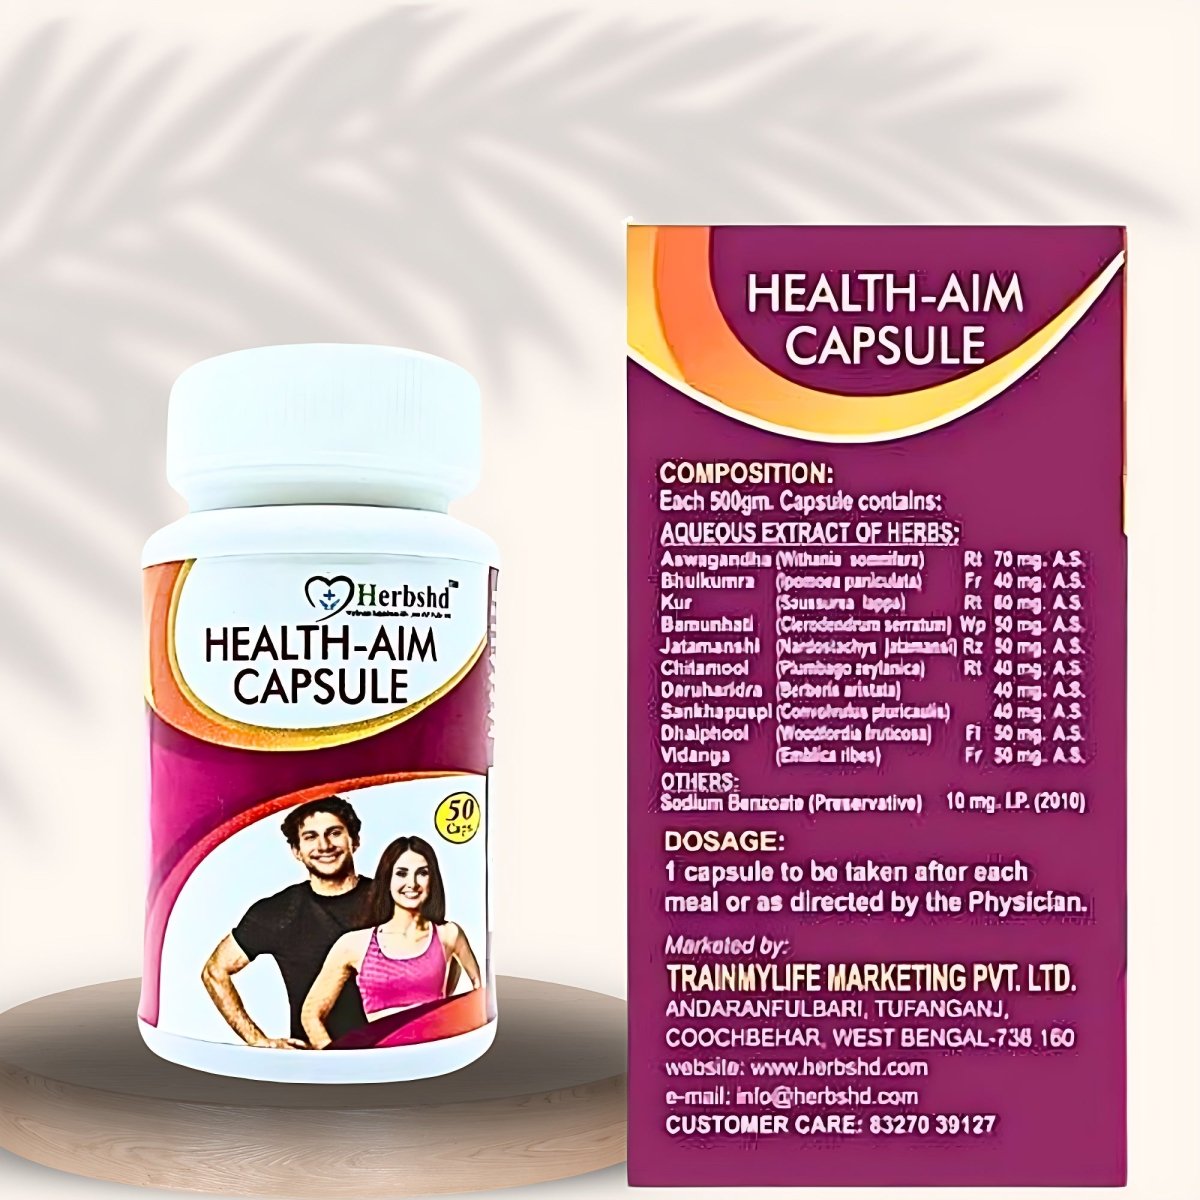 Ayurvedic Strong Health & Health Aim Capsules for Body building